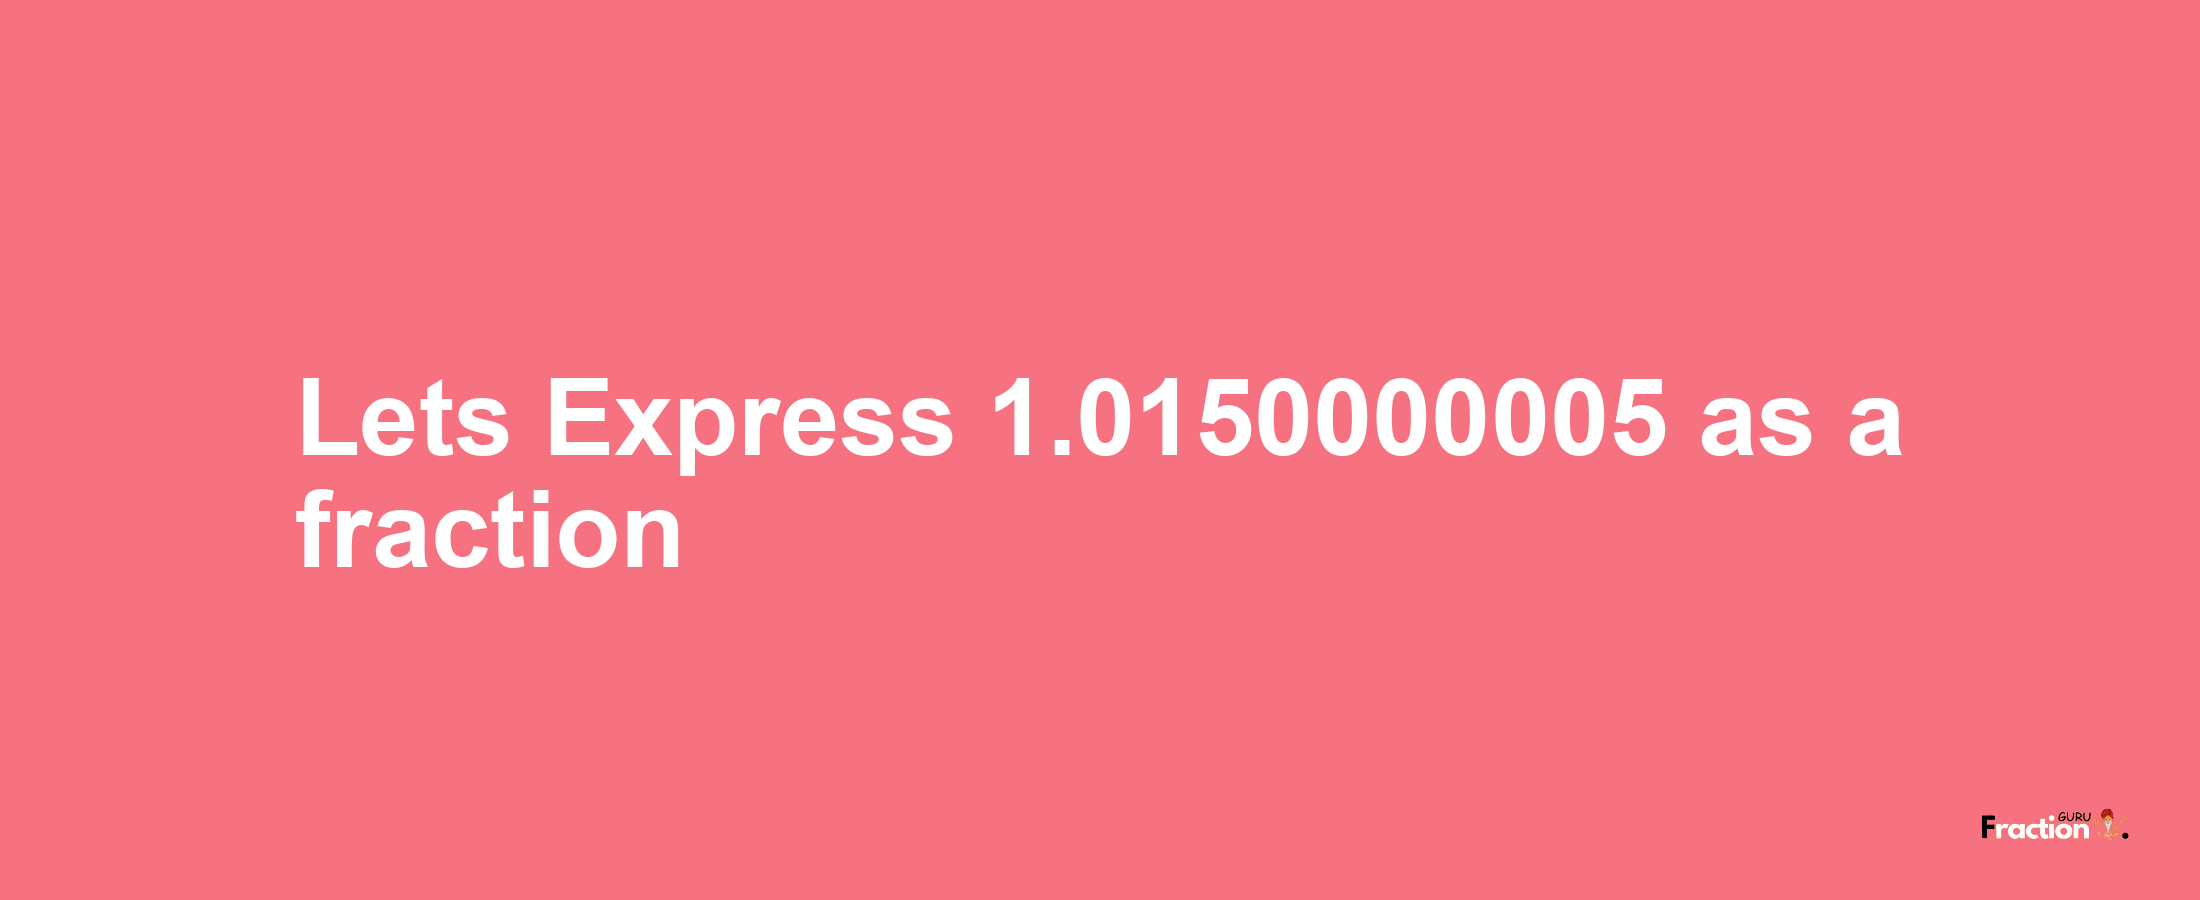 Lets Express 1.0150000005 as afraction